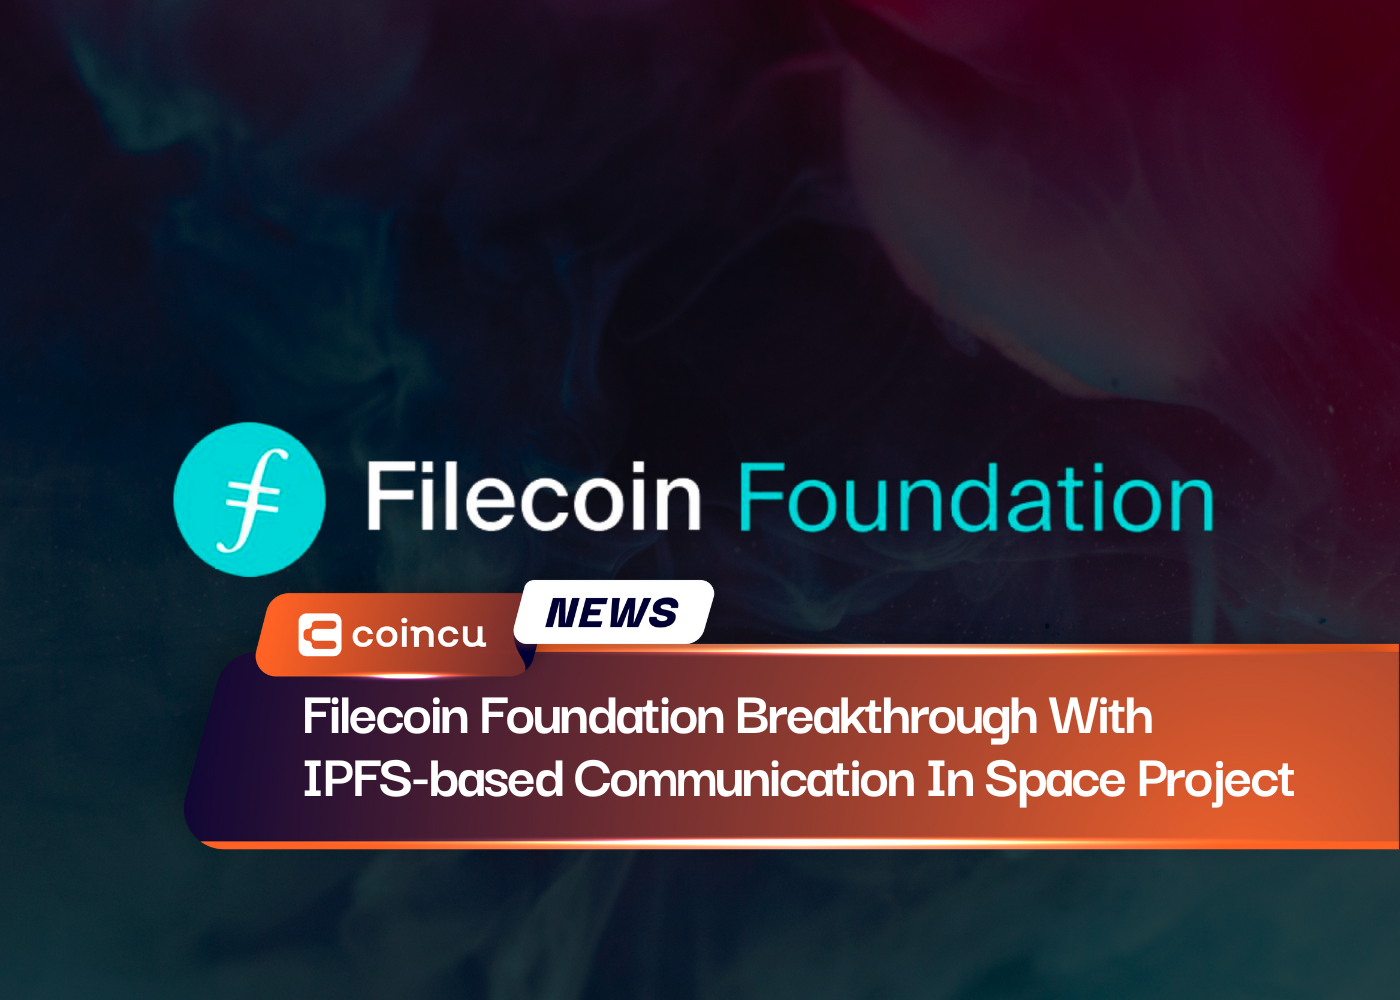 Filecoin Foundation Breakthrough With IPFS-based Communication In Space Project